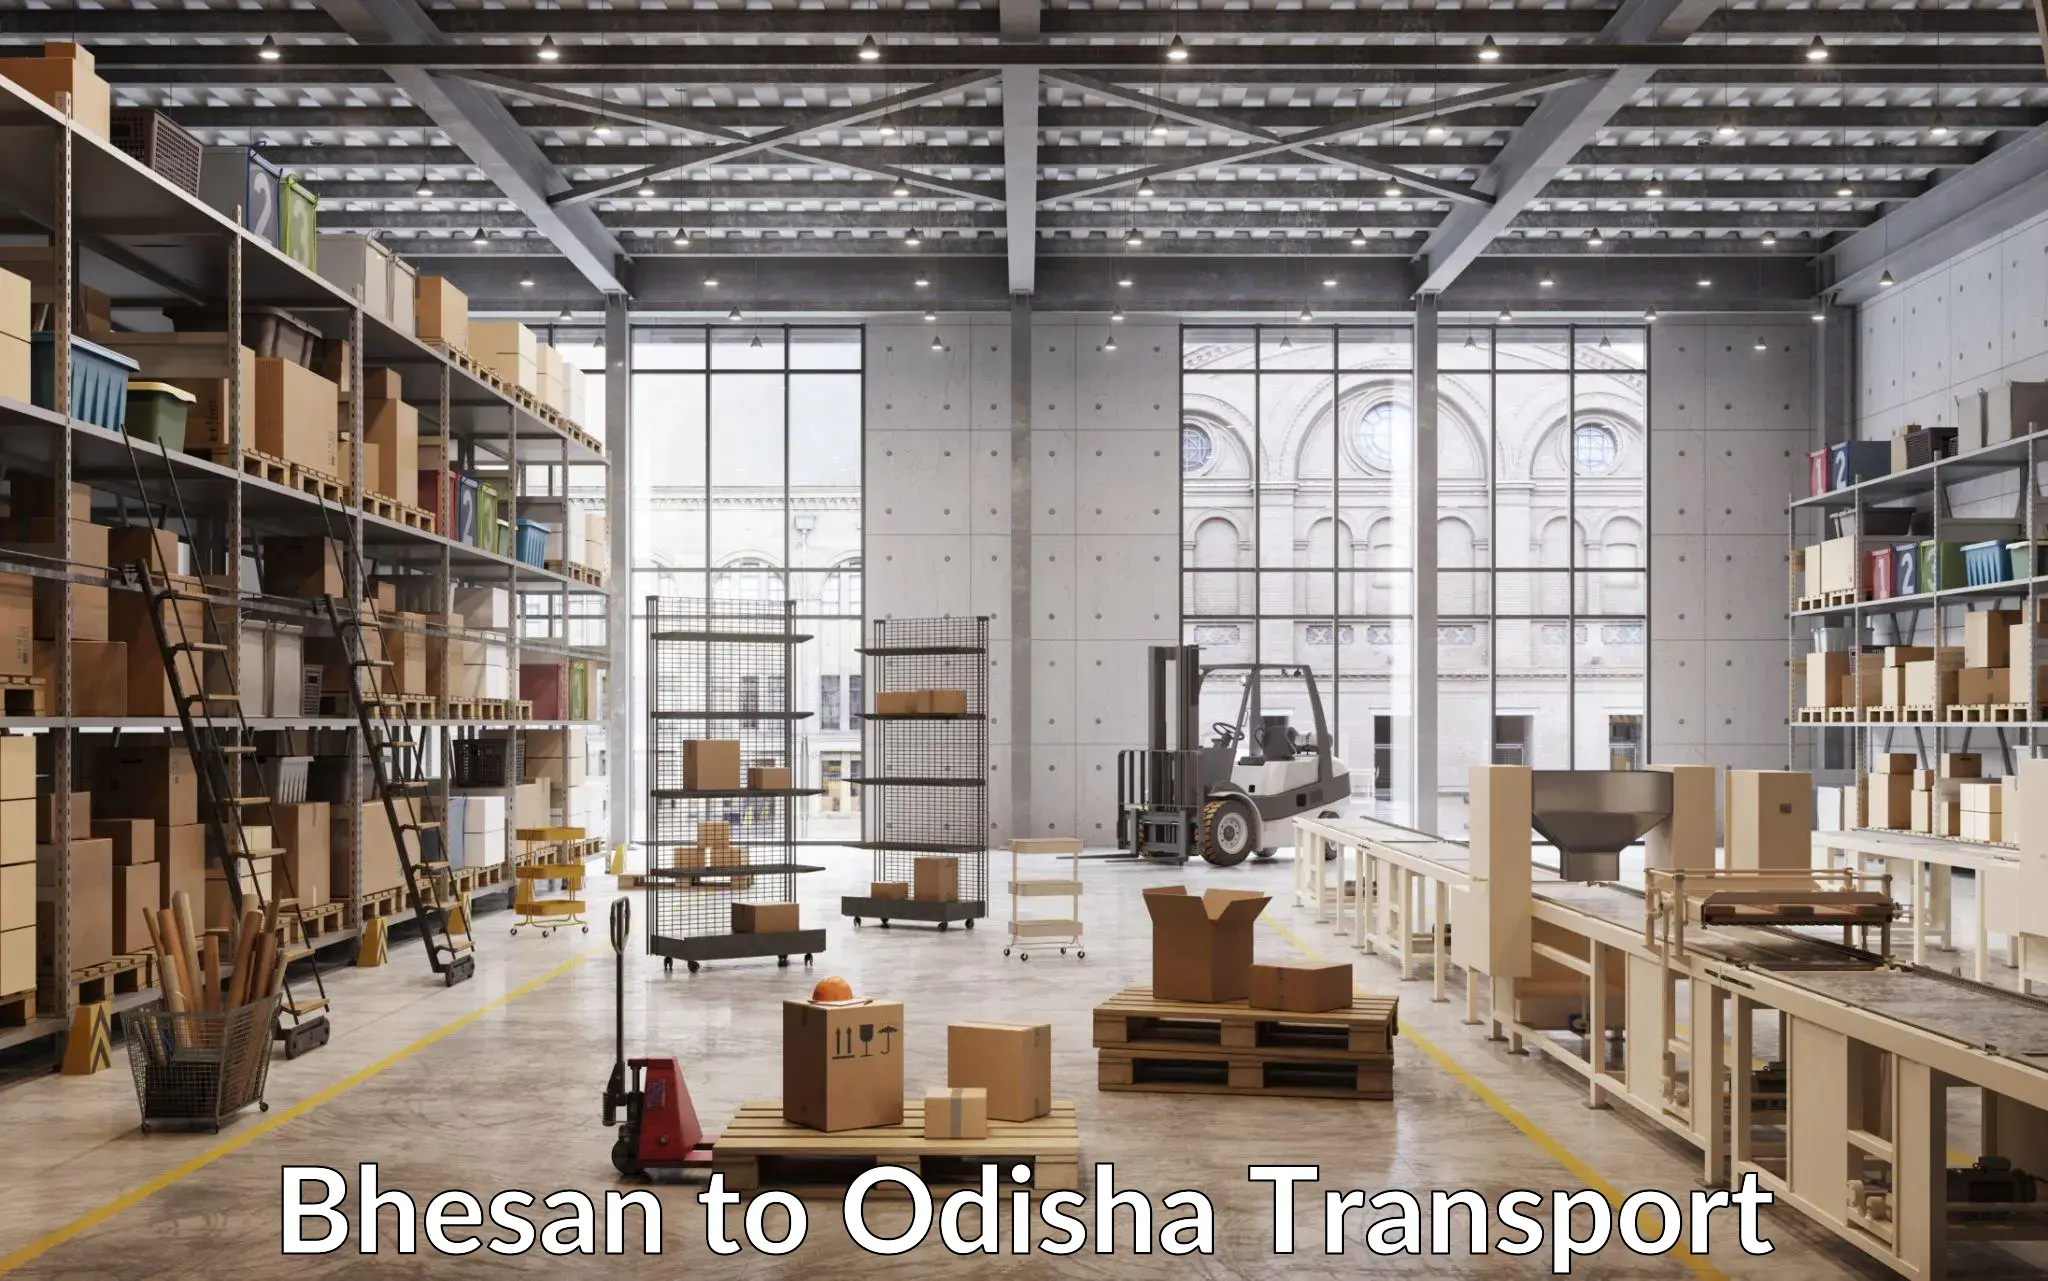 Commercial transport service Bhesan to Puri